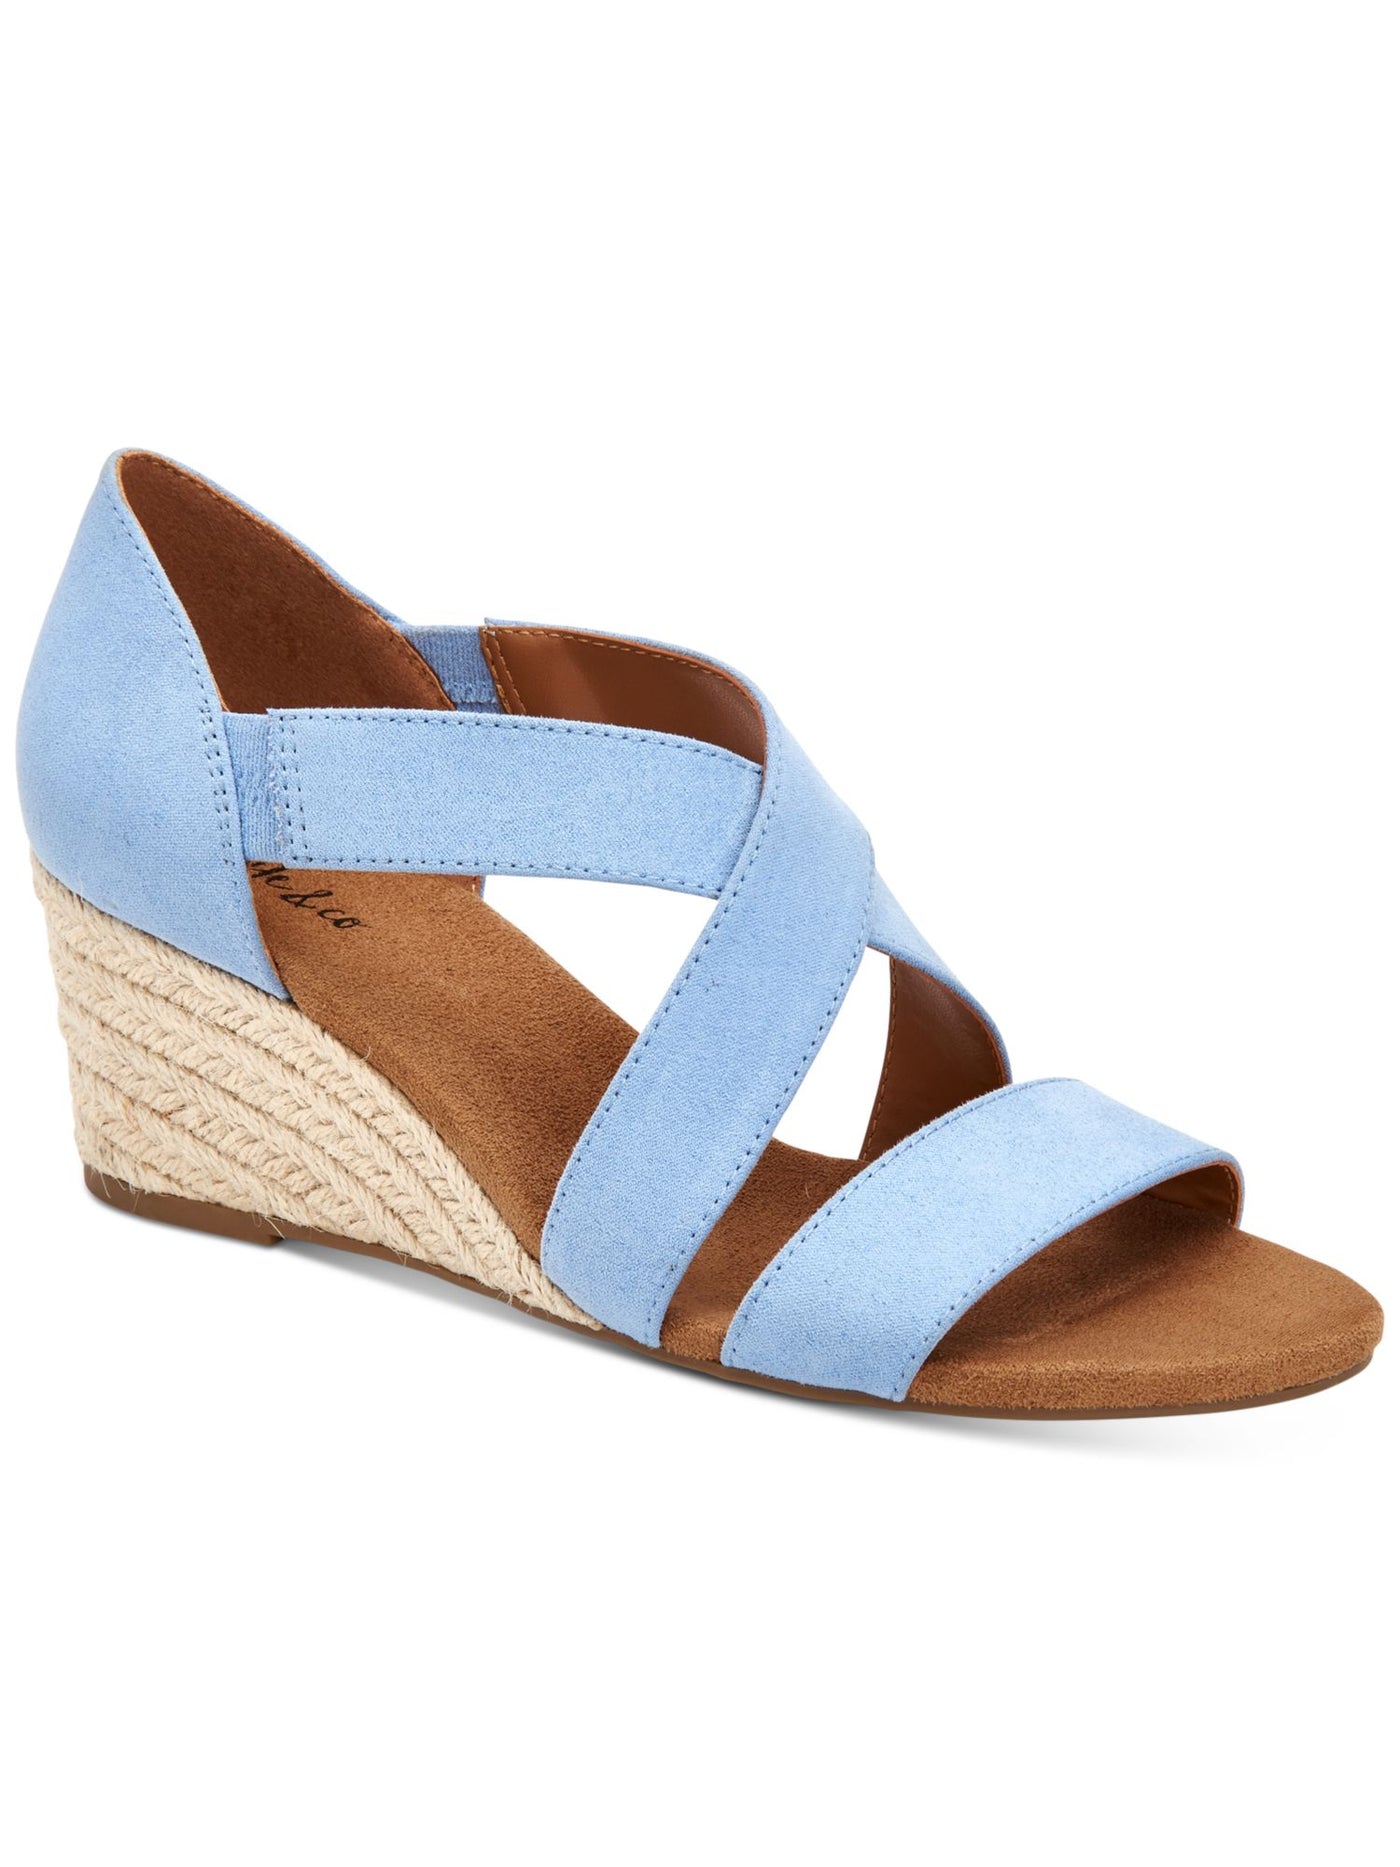 STYLE & COMPANY Womens Light Blue Padded Strappy Zaddie Almond Toe Wedge Slip On Espadrille Shoes 10 M